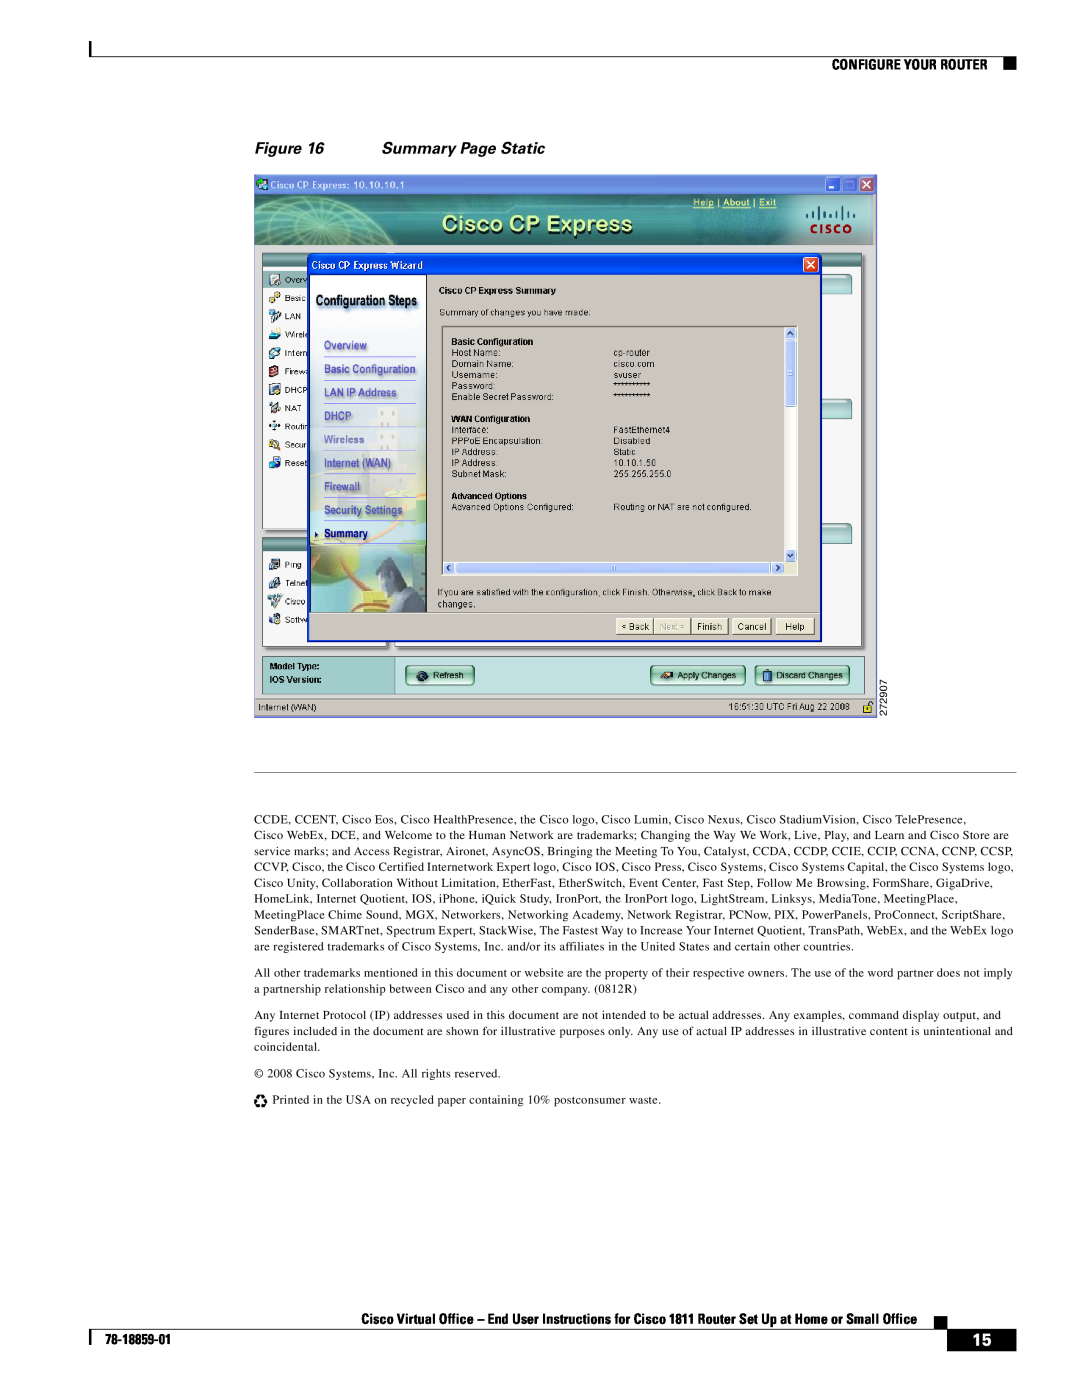 Cisco Systems CISCO1811 manual Summary Page Static, Configure Your Router, 78-18859-01 